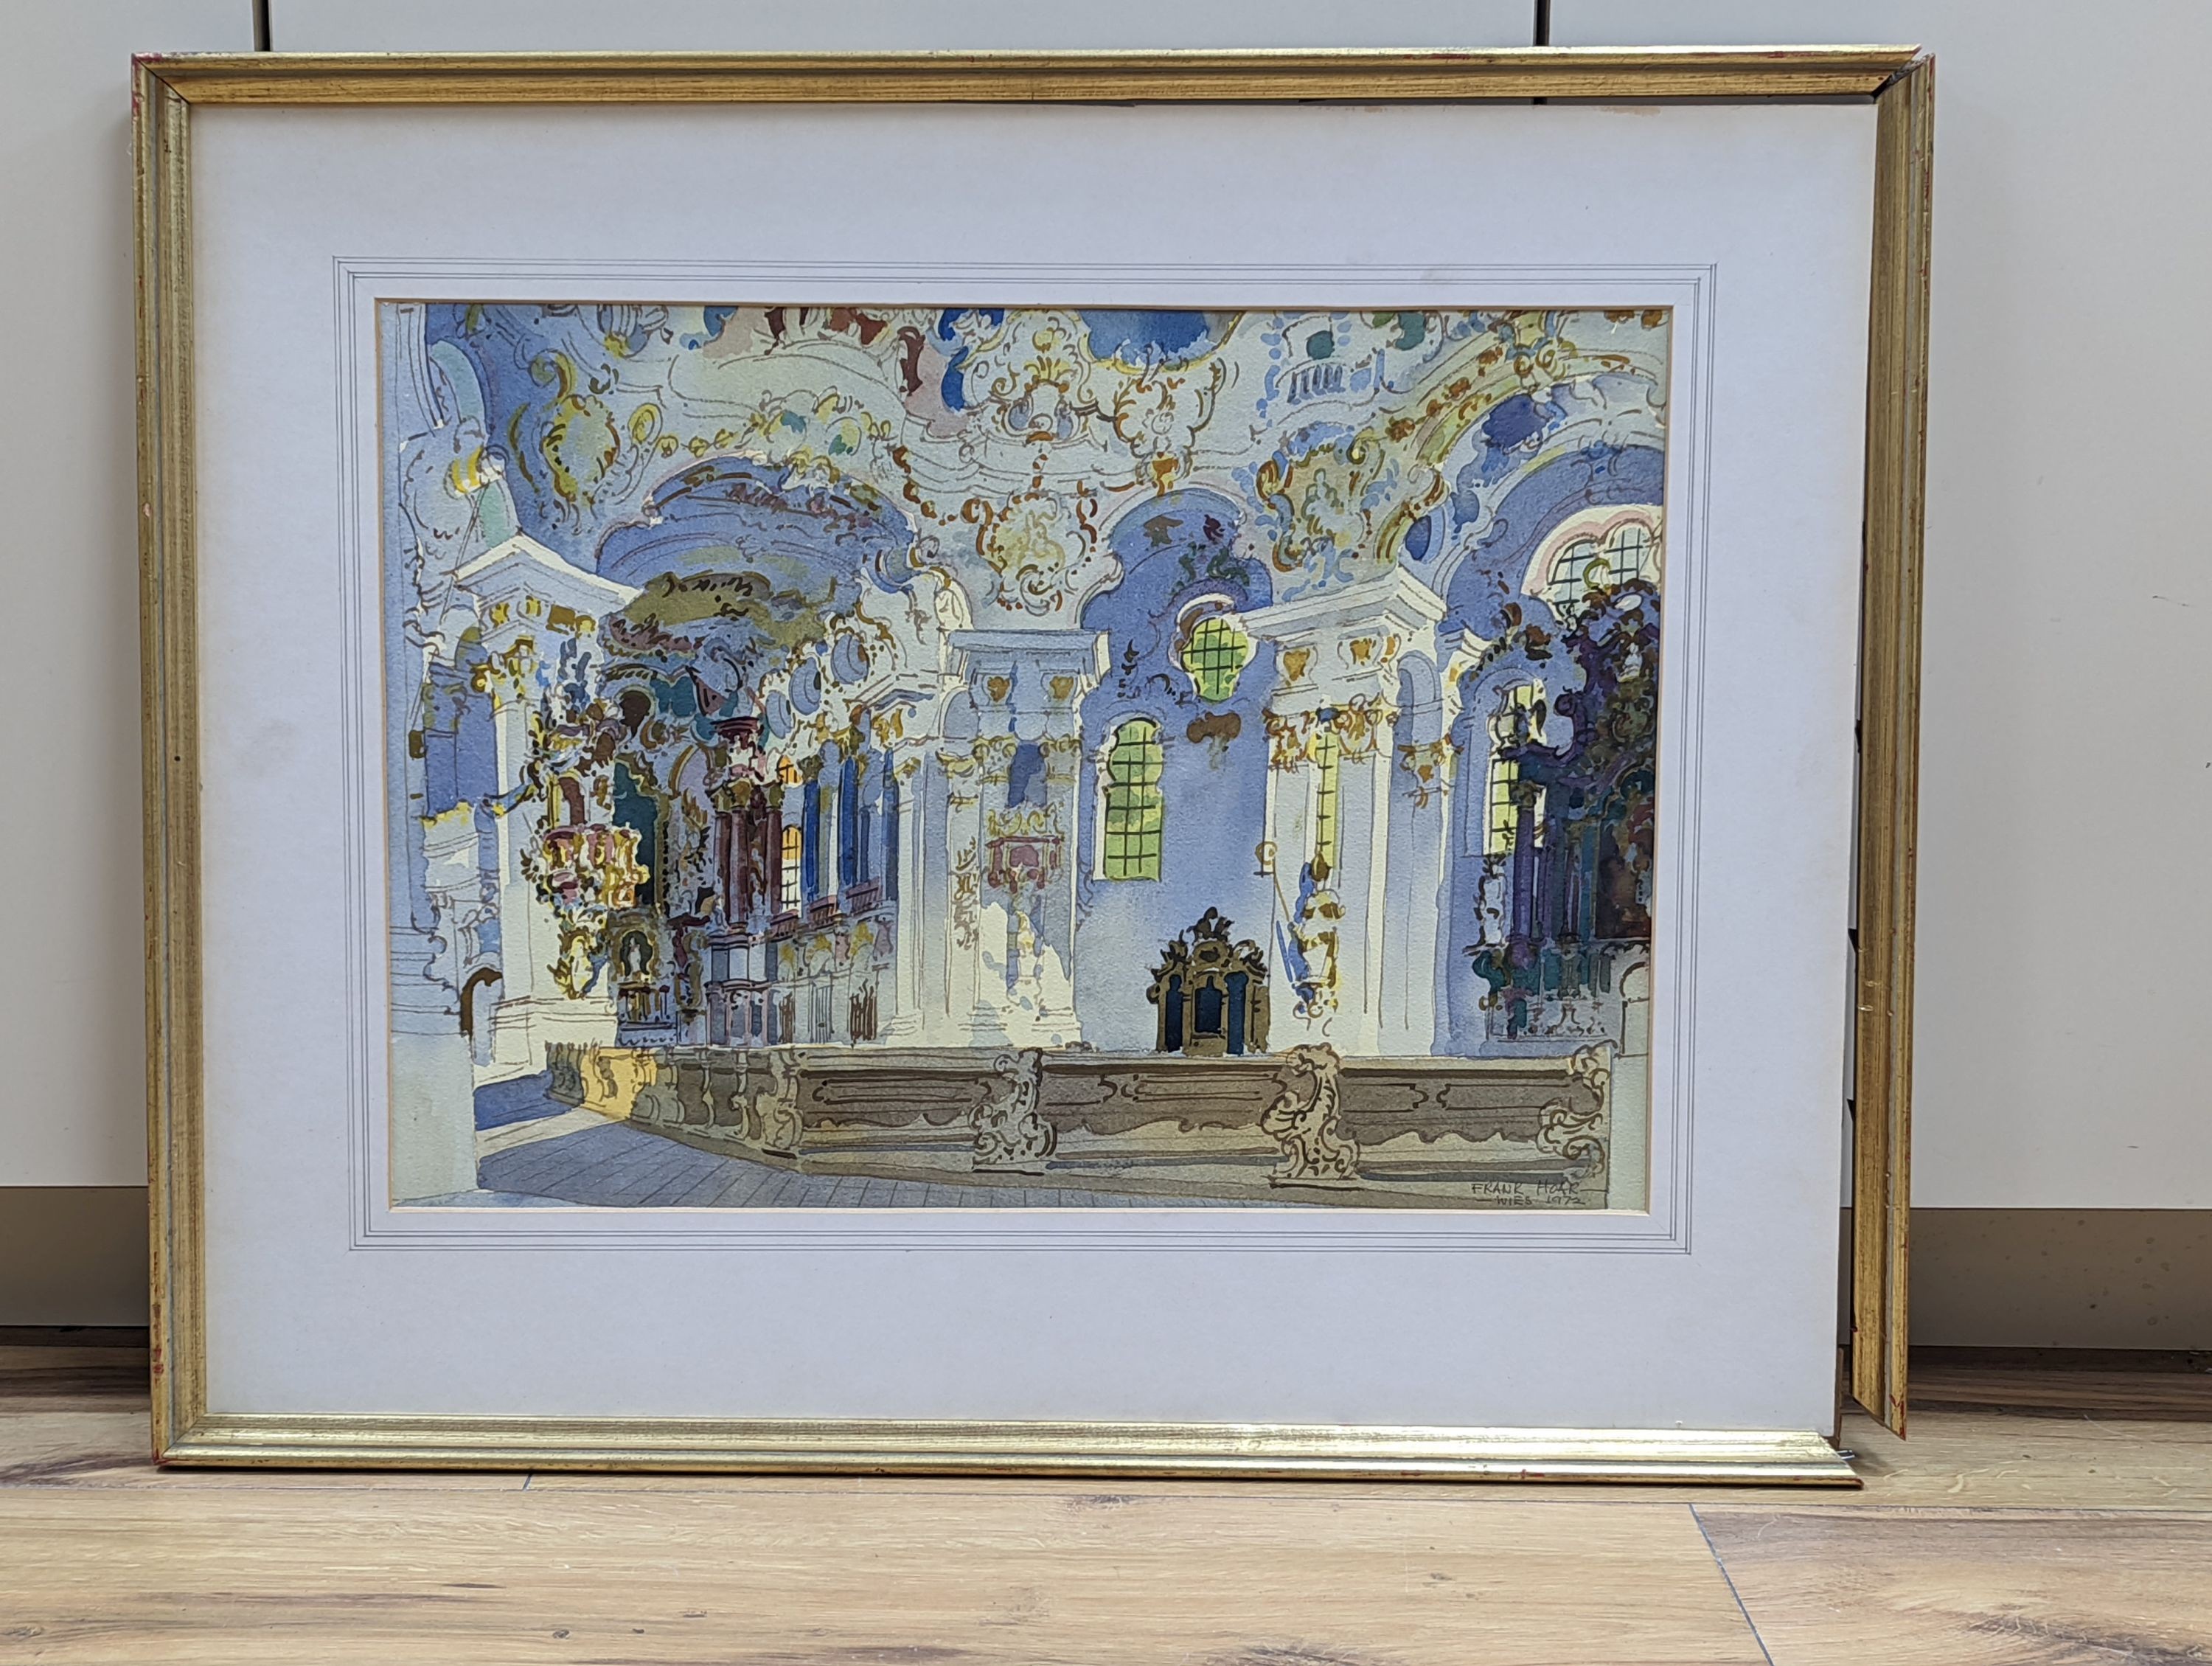 Frank Hoar (1909-1976), watercolour, Palace interior, signed and inscribed 'Wies 1972', 36 x 51cm